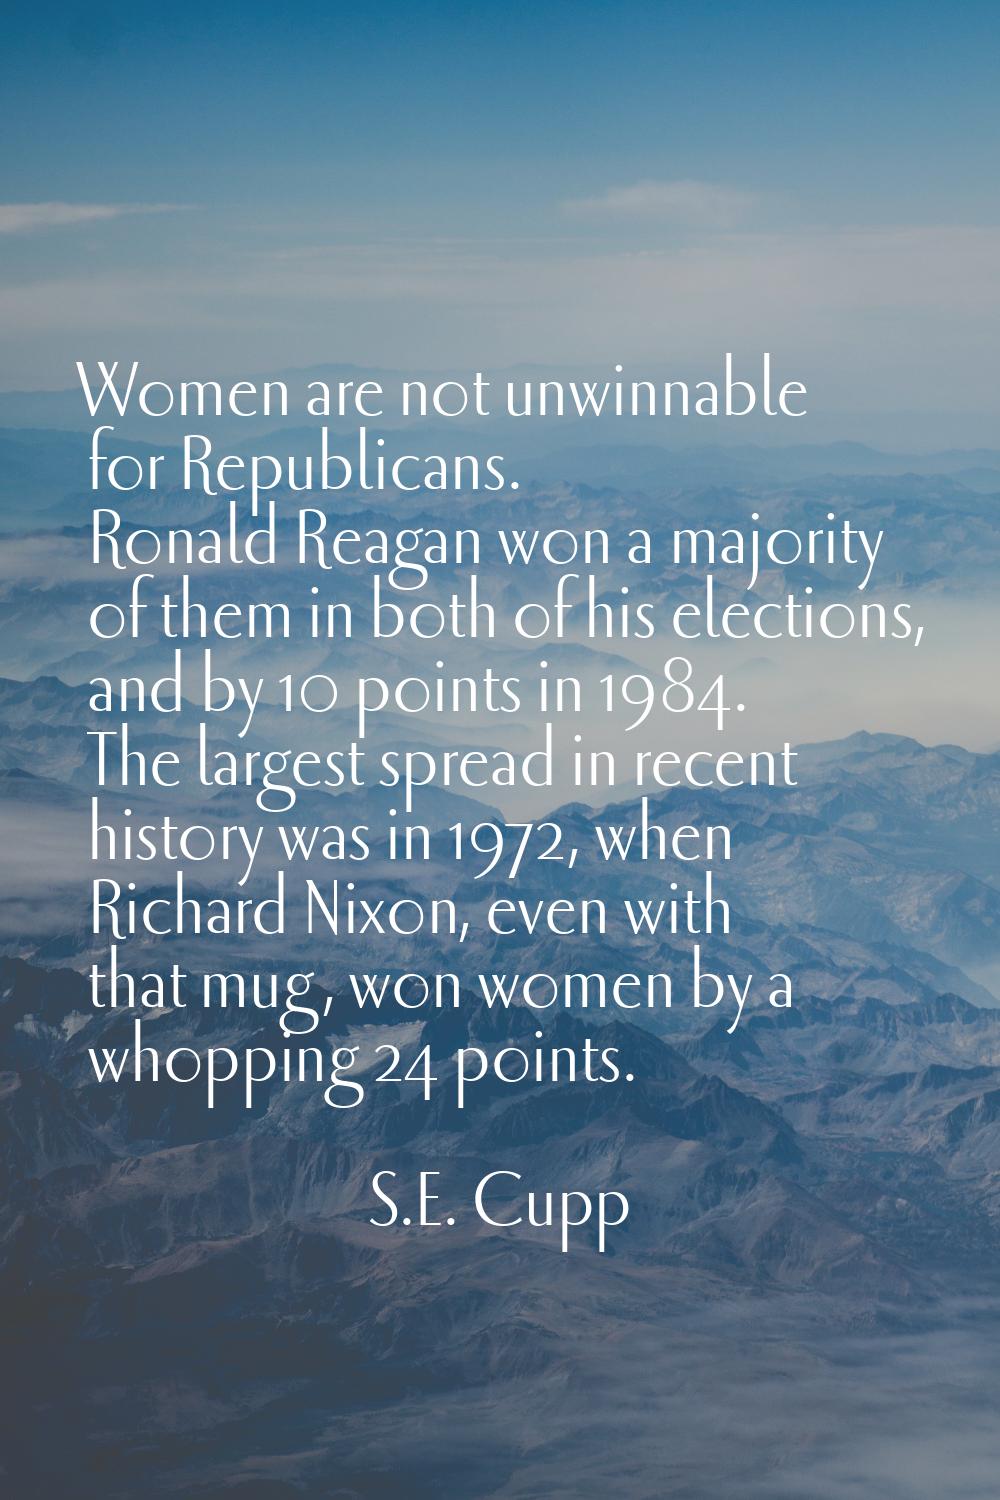 Women are not unwinnable for Republicans. Ronald Reagan won a majority of them in both of his elect